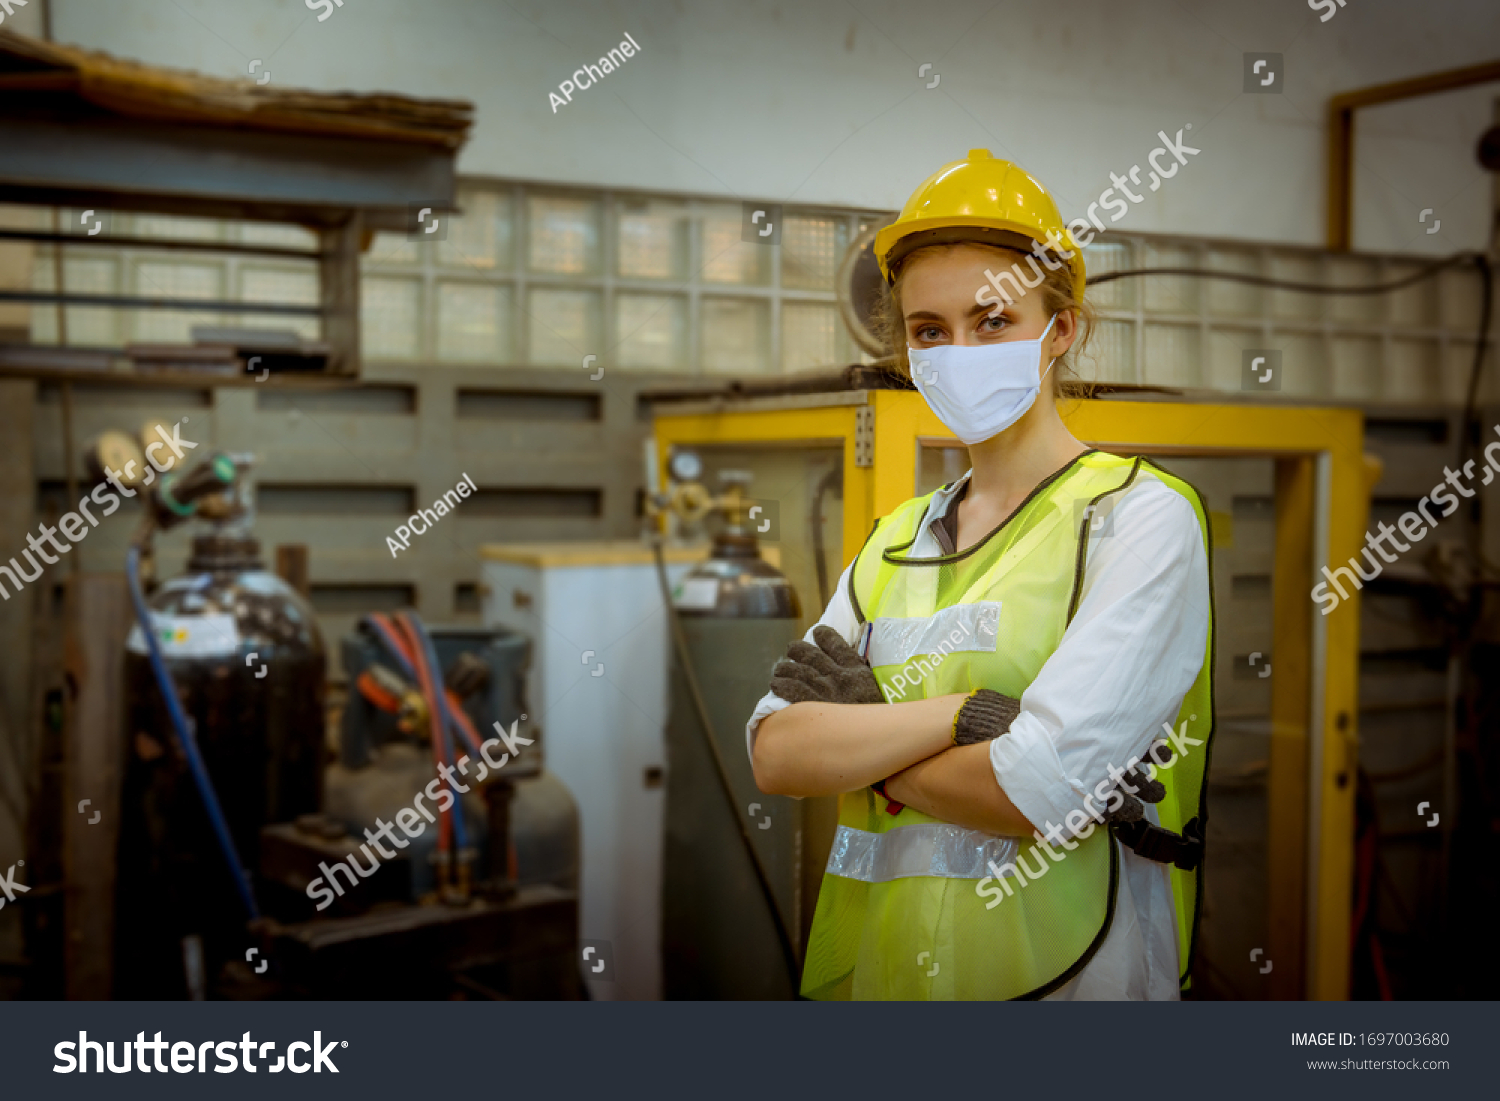 Portrait woman worker under inspection and checking production process on factory station by wearing safety mask face to protect for pollution and virus in factory. #1697003680